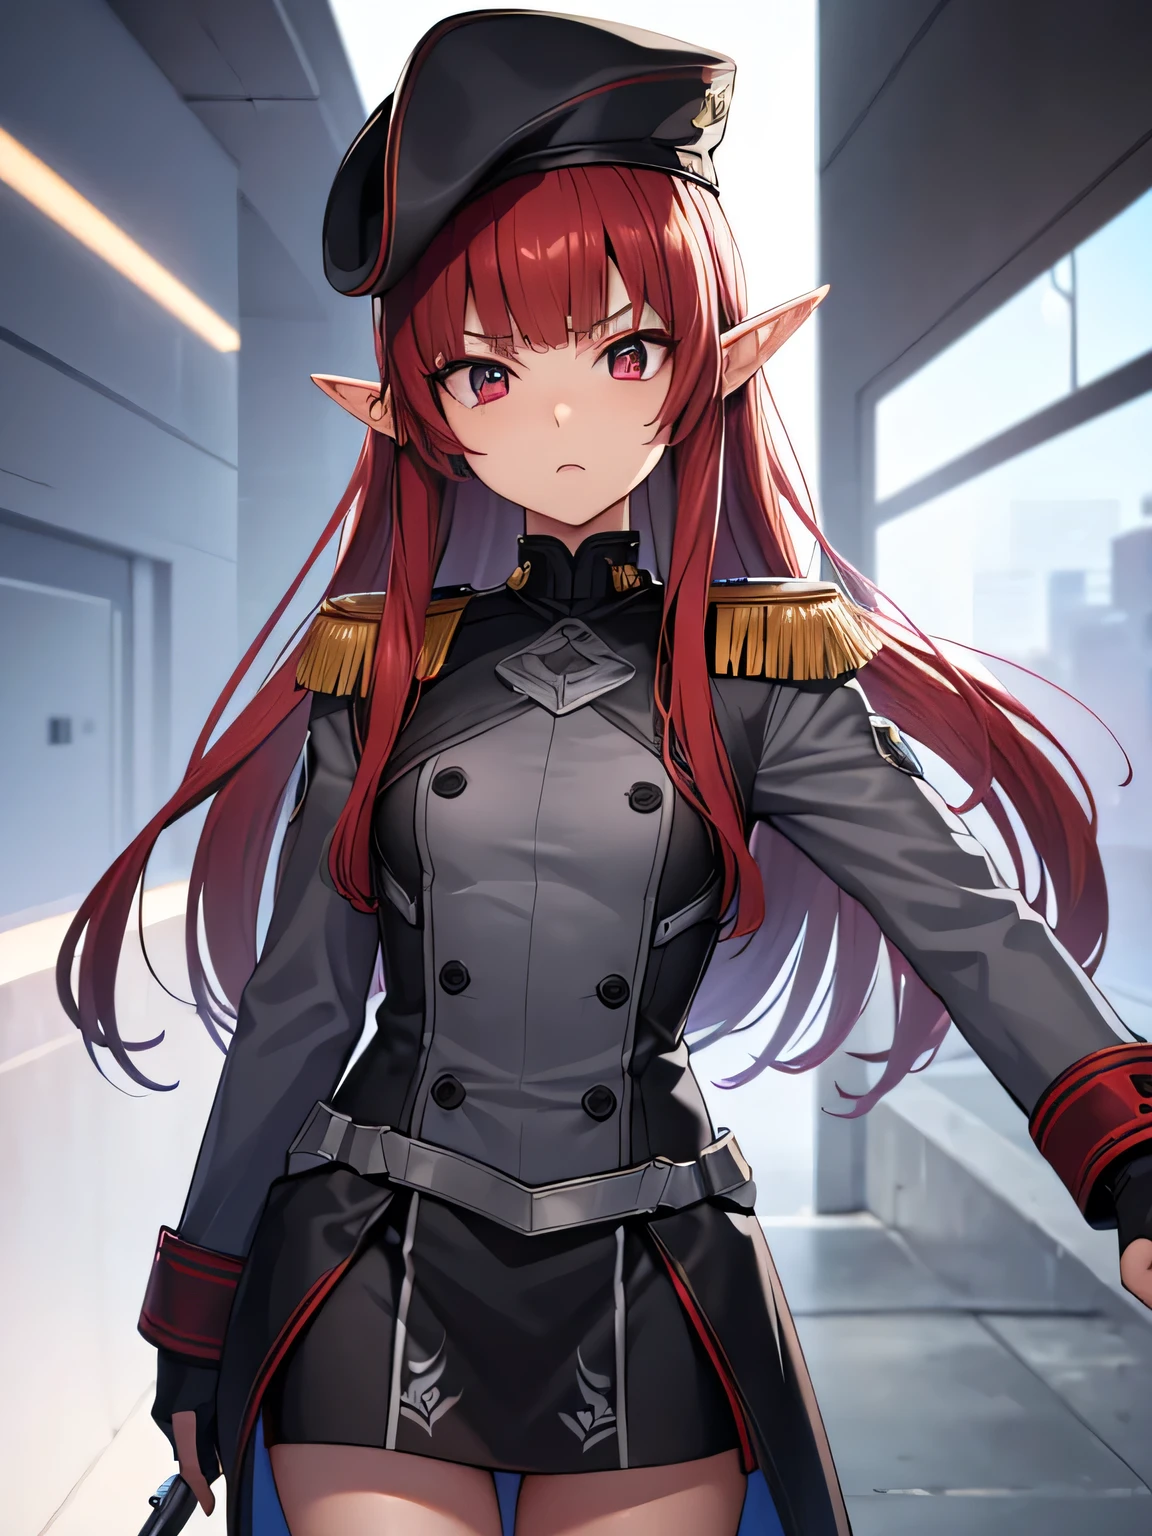 highly detailed 3D rendering of a character named Ulc from SEGA's PSO2. elf-like female with pointed ears, (small gray woman's Garrison cap), (long straight dark red hair), (gray futuristic military-style uniform, including a fitted jacket with intricate white designs, shoulder epaulets, and a skirt), (annoyed, stupefied), (one hand near her ear as if she is communicating through a device)